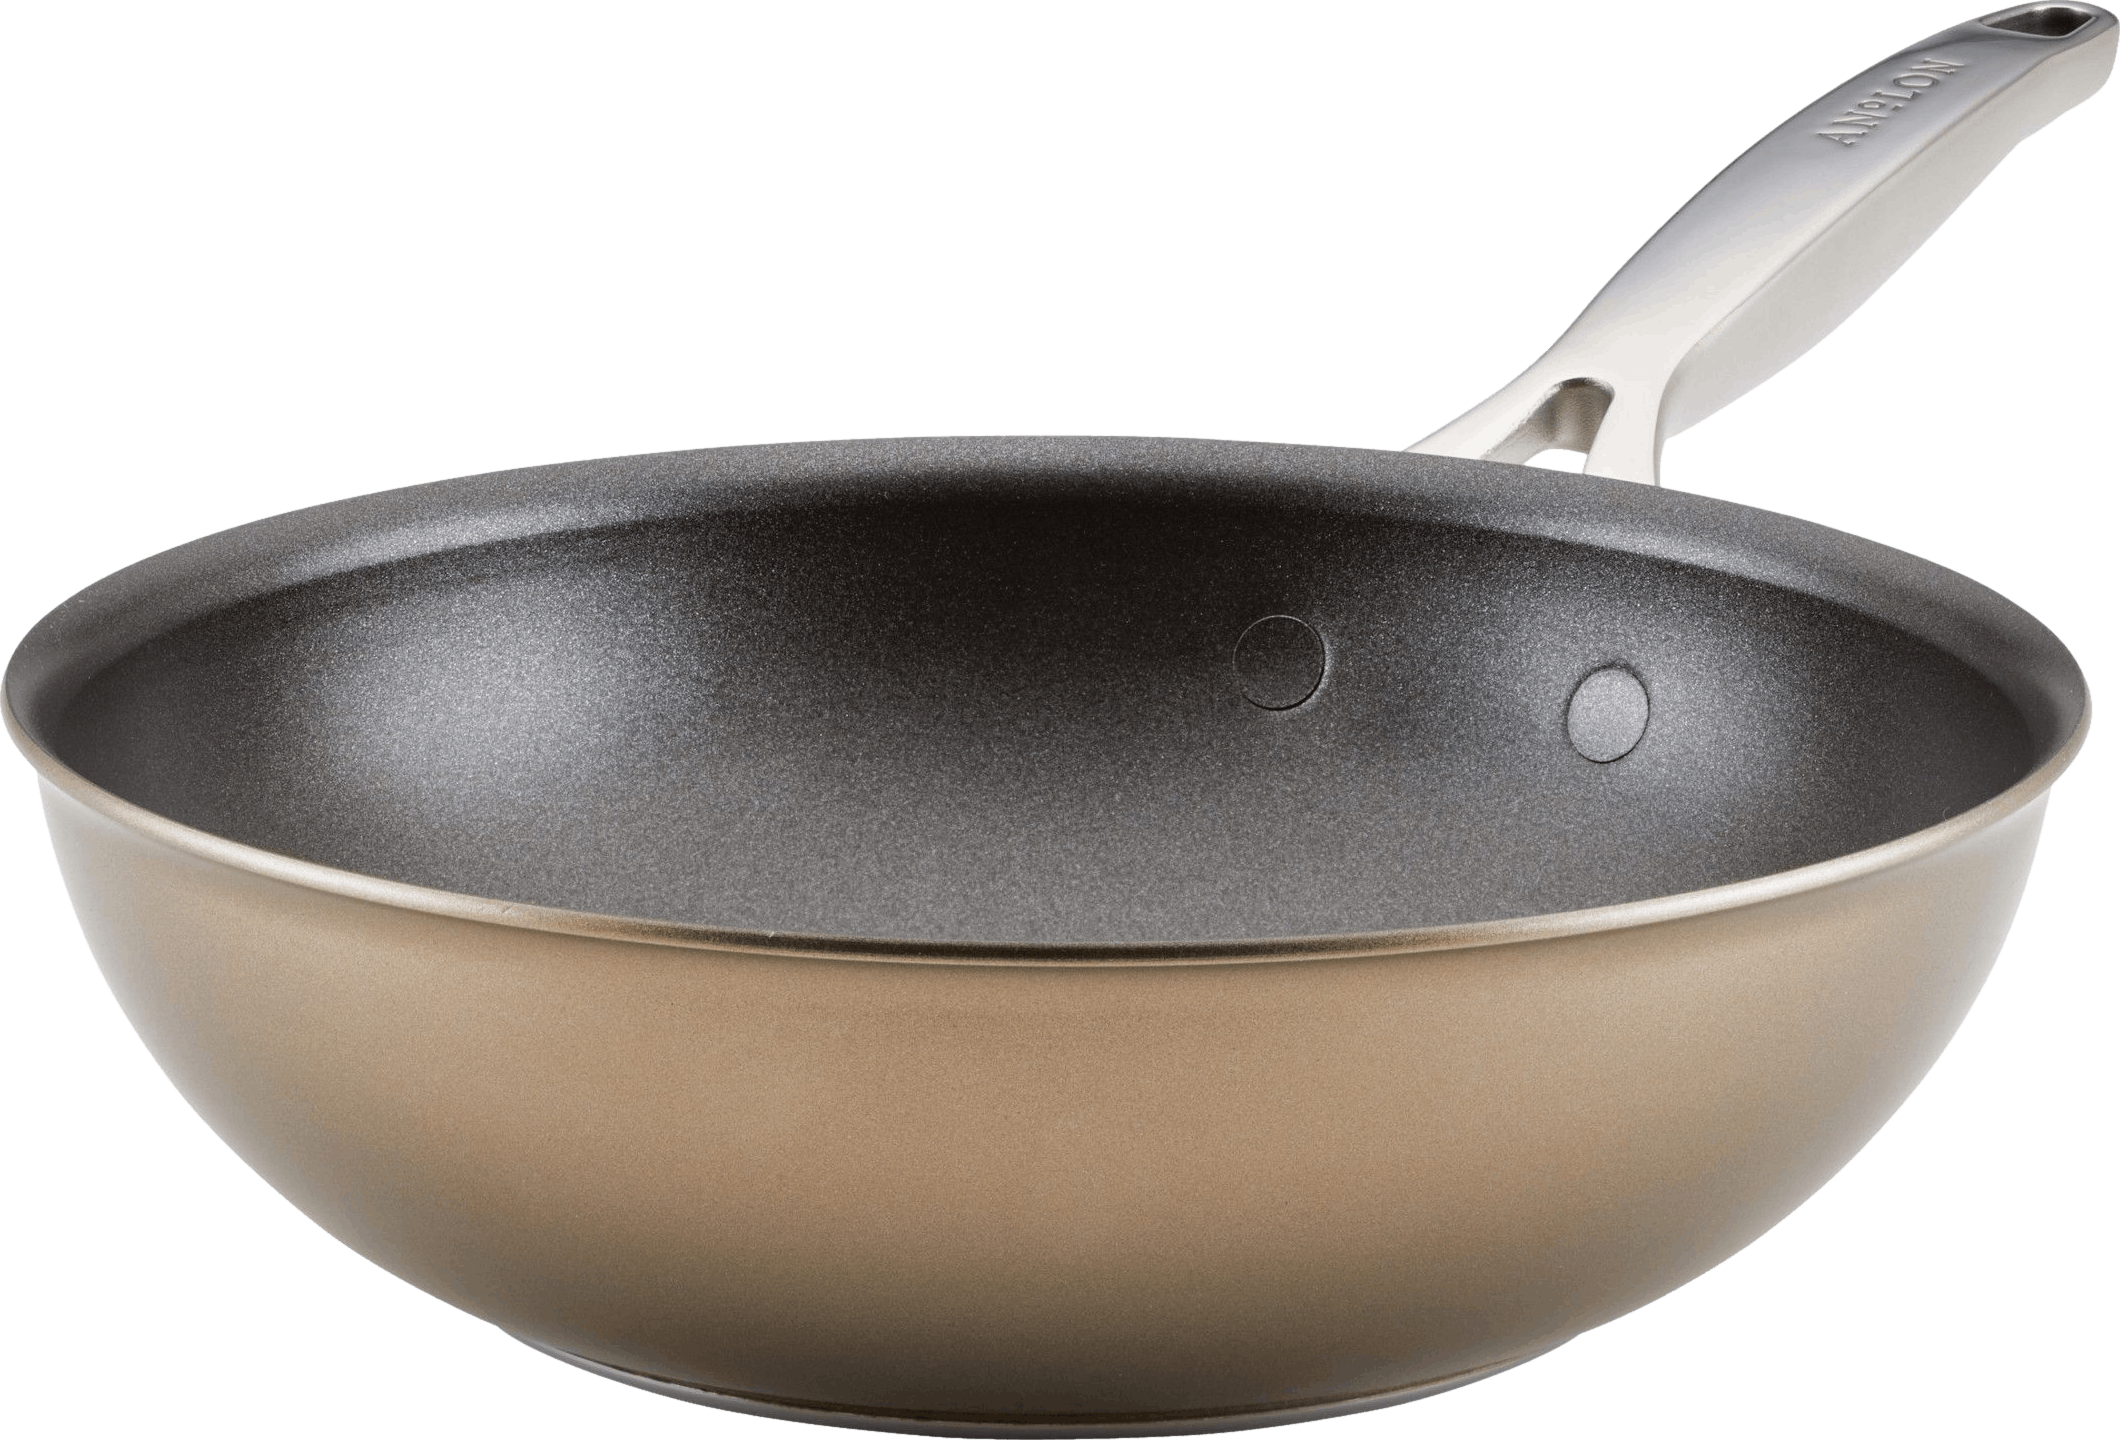 Anolon Ascend Hard Anodized Nonstick Frying Pan 12-Inch